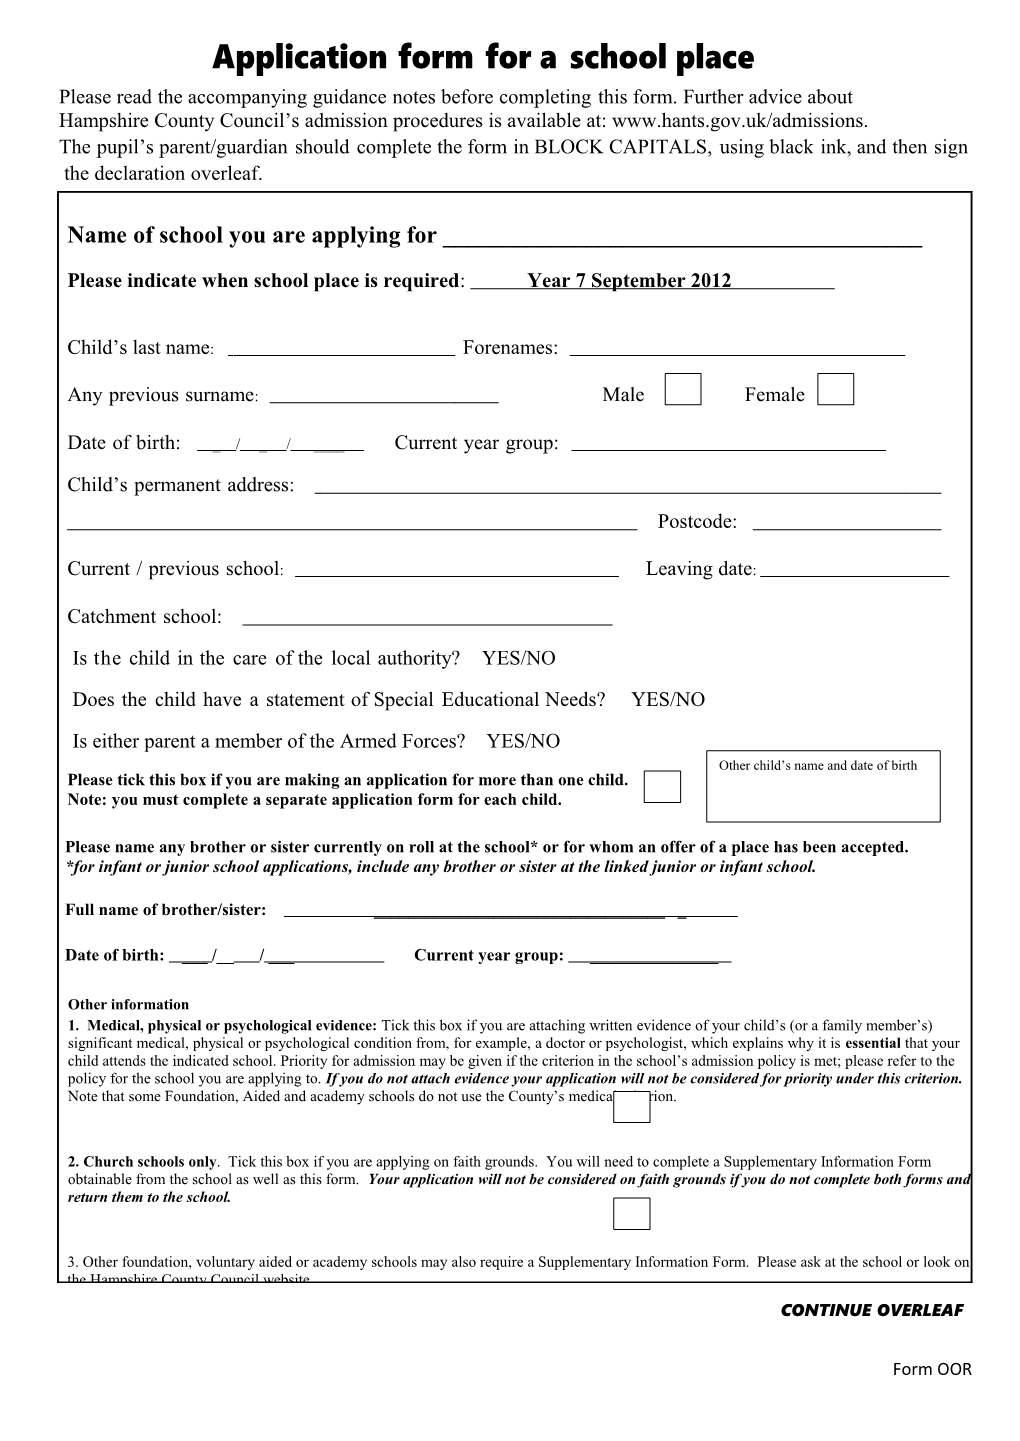 Application Form for Admission to a Hampshire School Outside the Main Admission Round